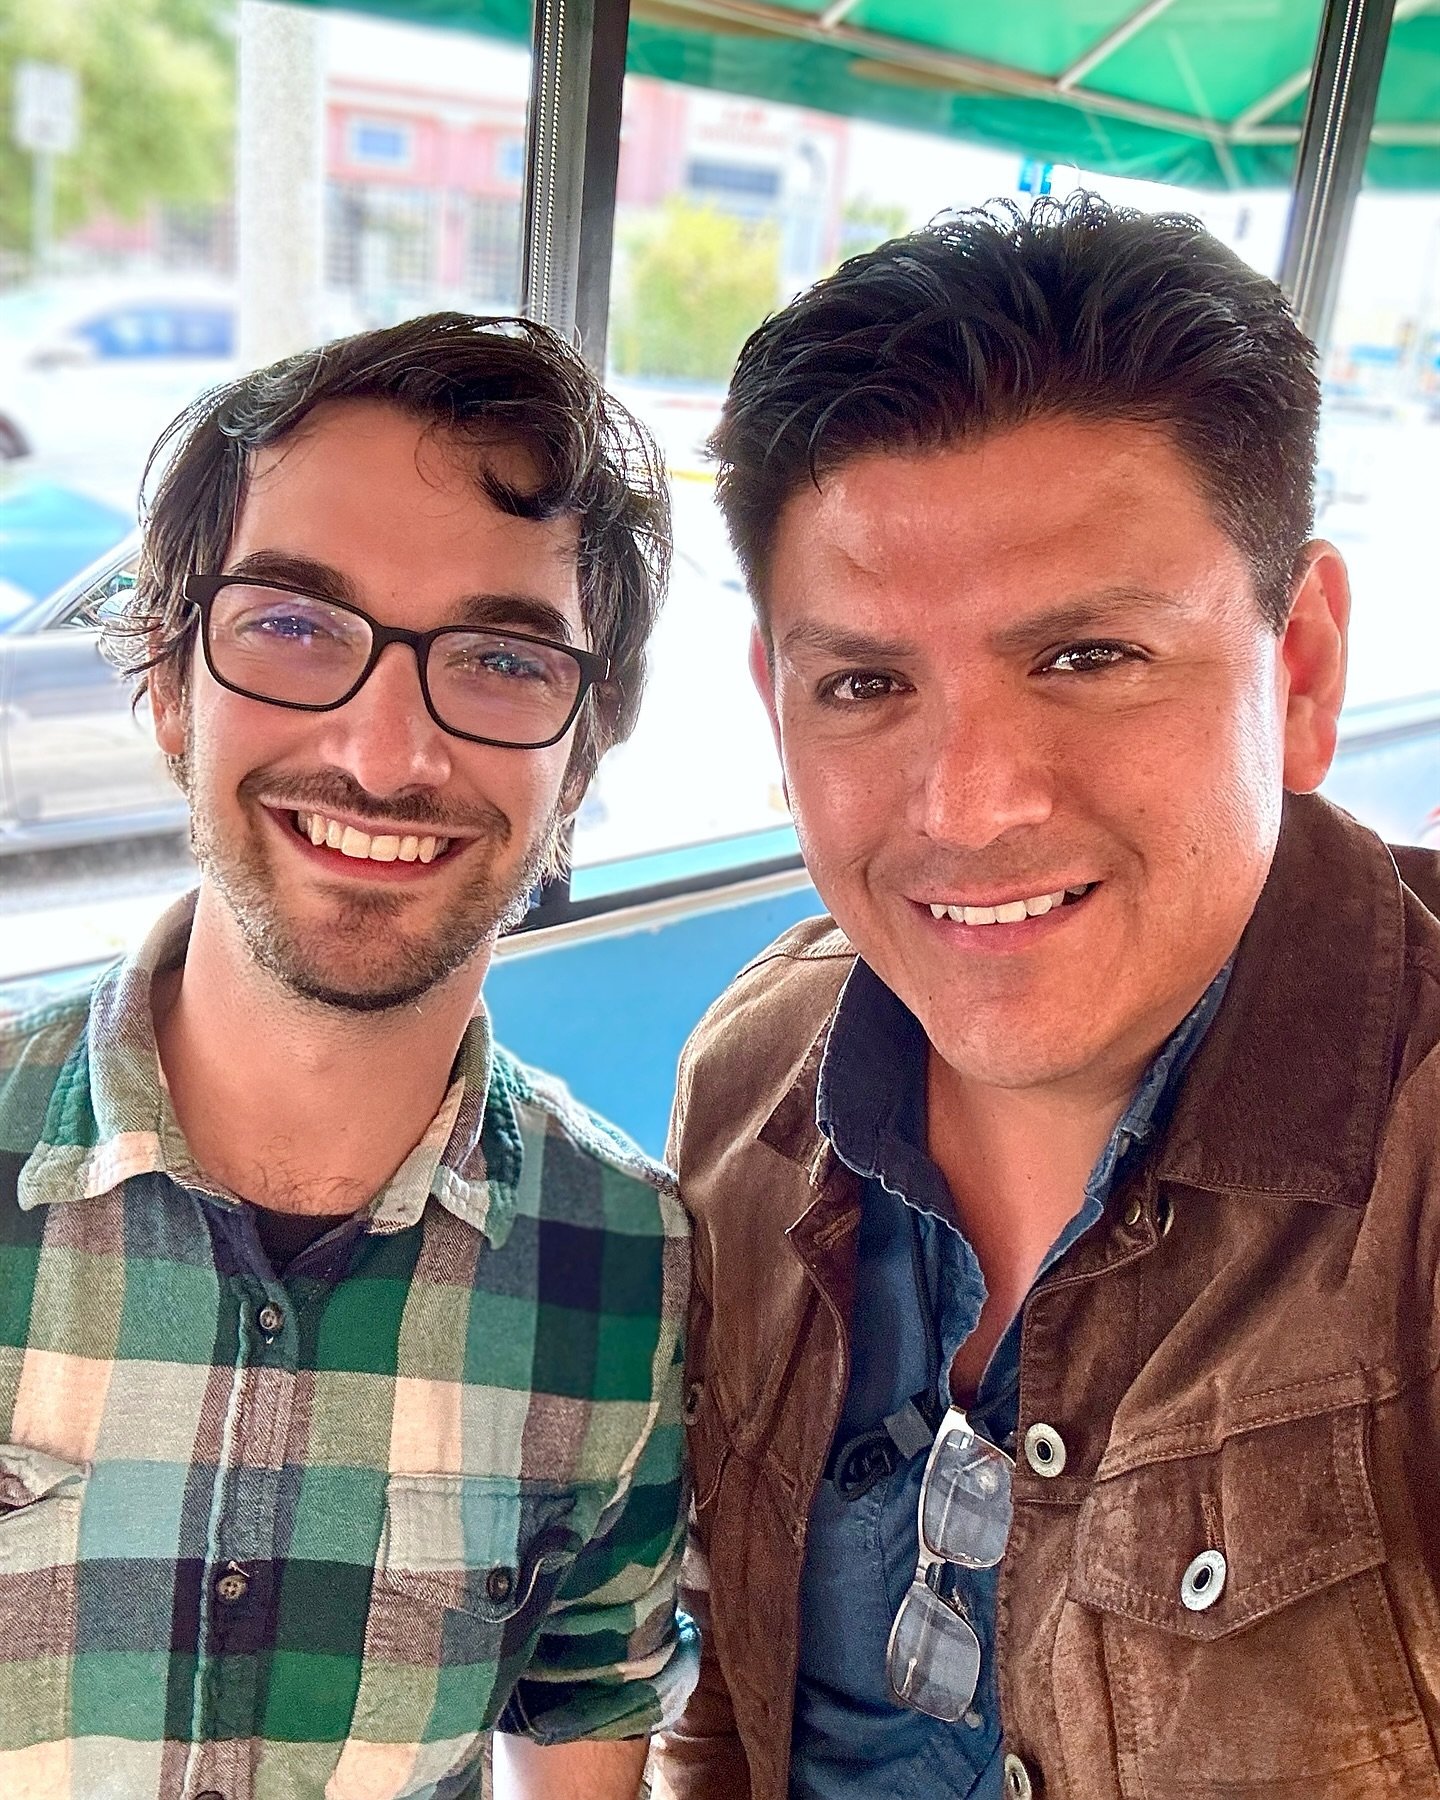 Today I had the wonderful opportunity to grab a coffee with one of my YouTube composer heros! Mr. Zach Heyde!! Great to talk with him about music, movies &amp; life. Thanks so much for your time man. Can&rsquo;t wait to do it again! #composer #compos